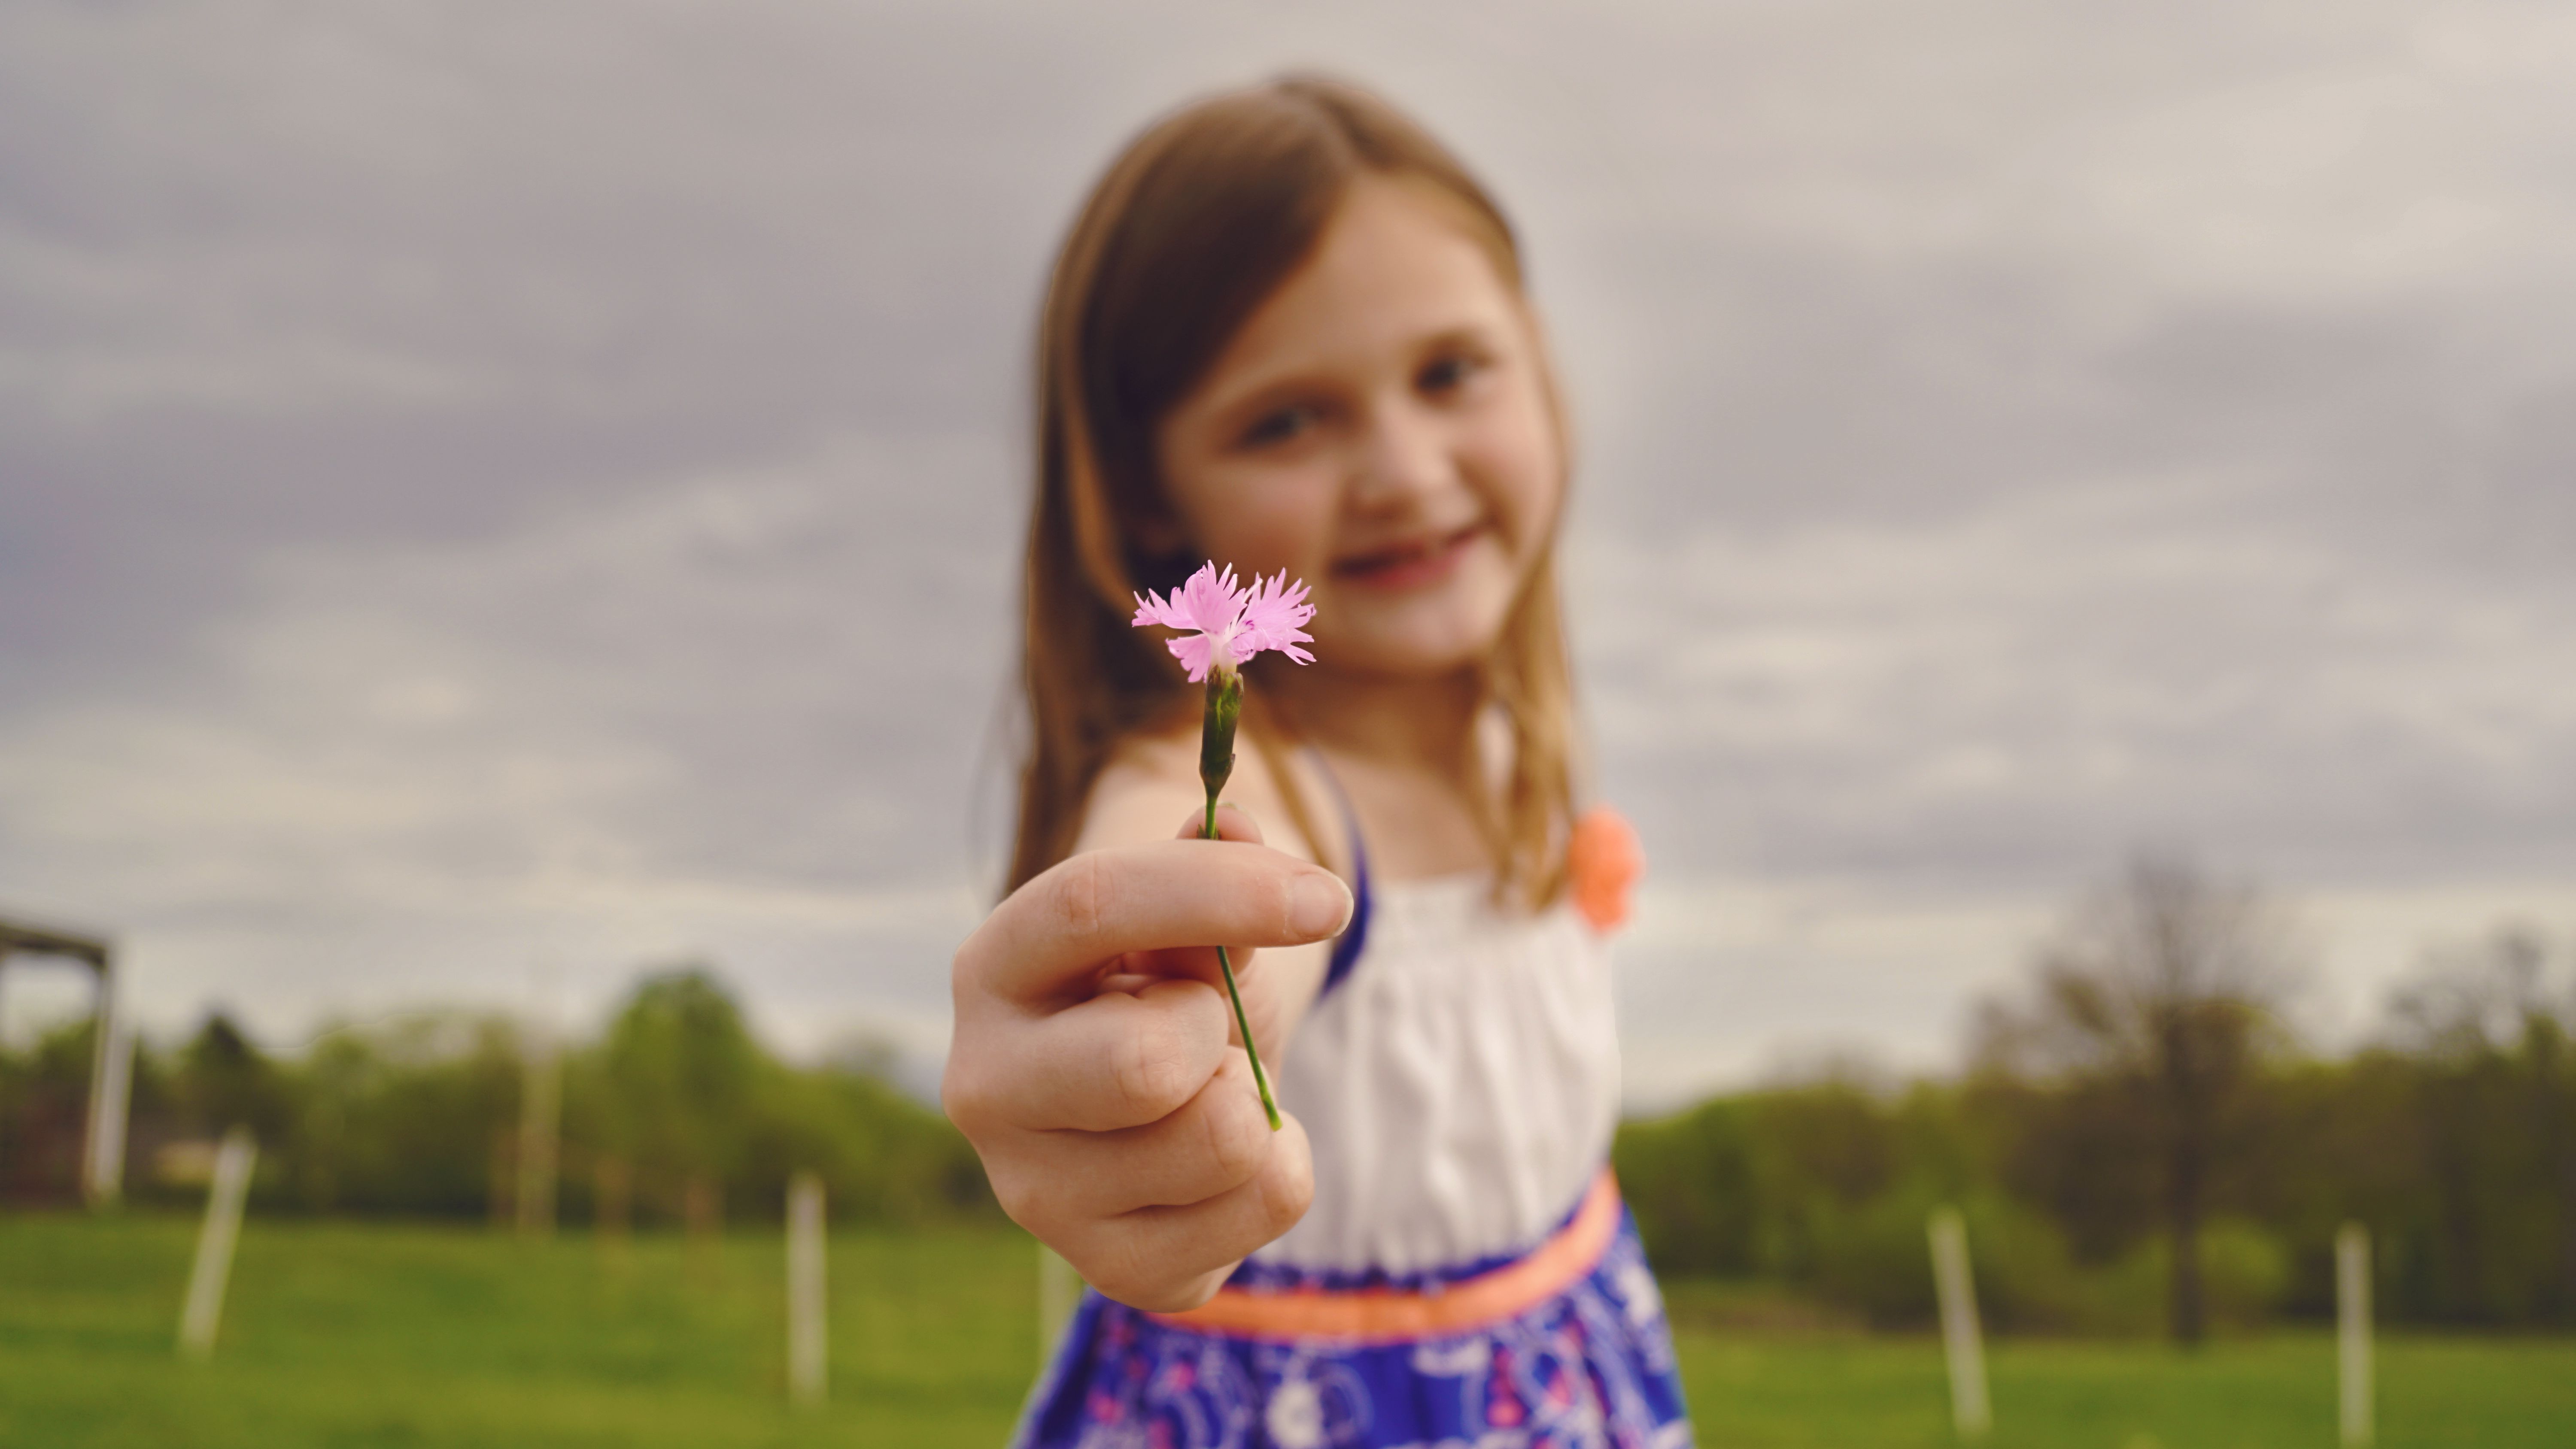 Selective Focus Photography of Girl Holding Pink Flower wallpaper